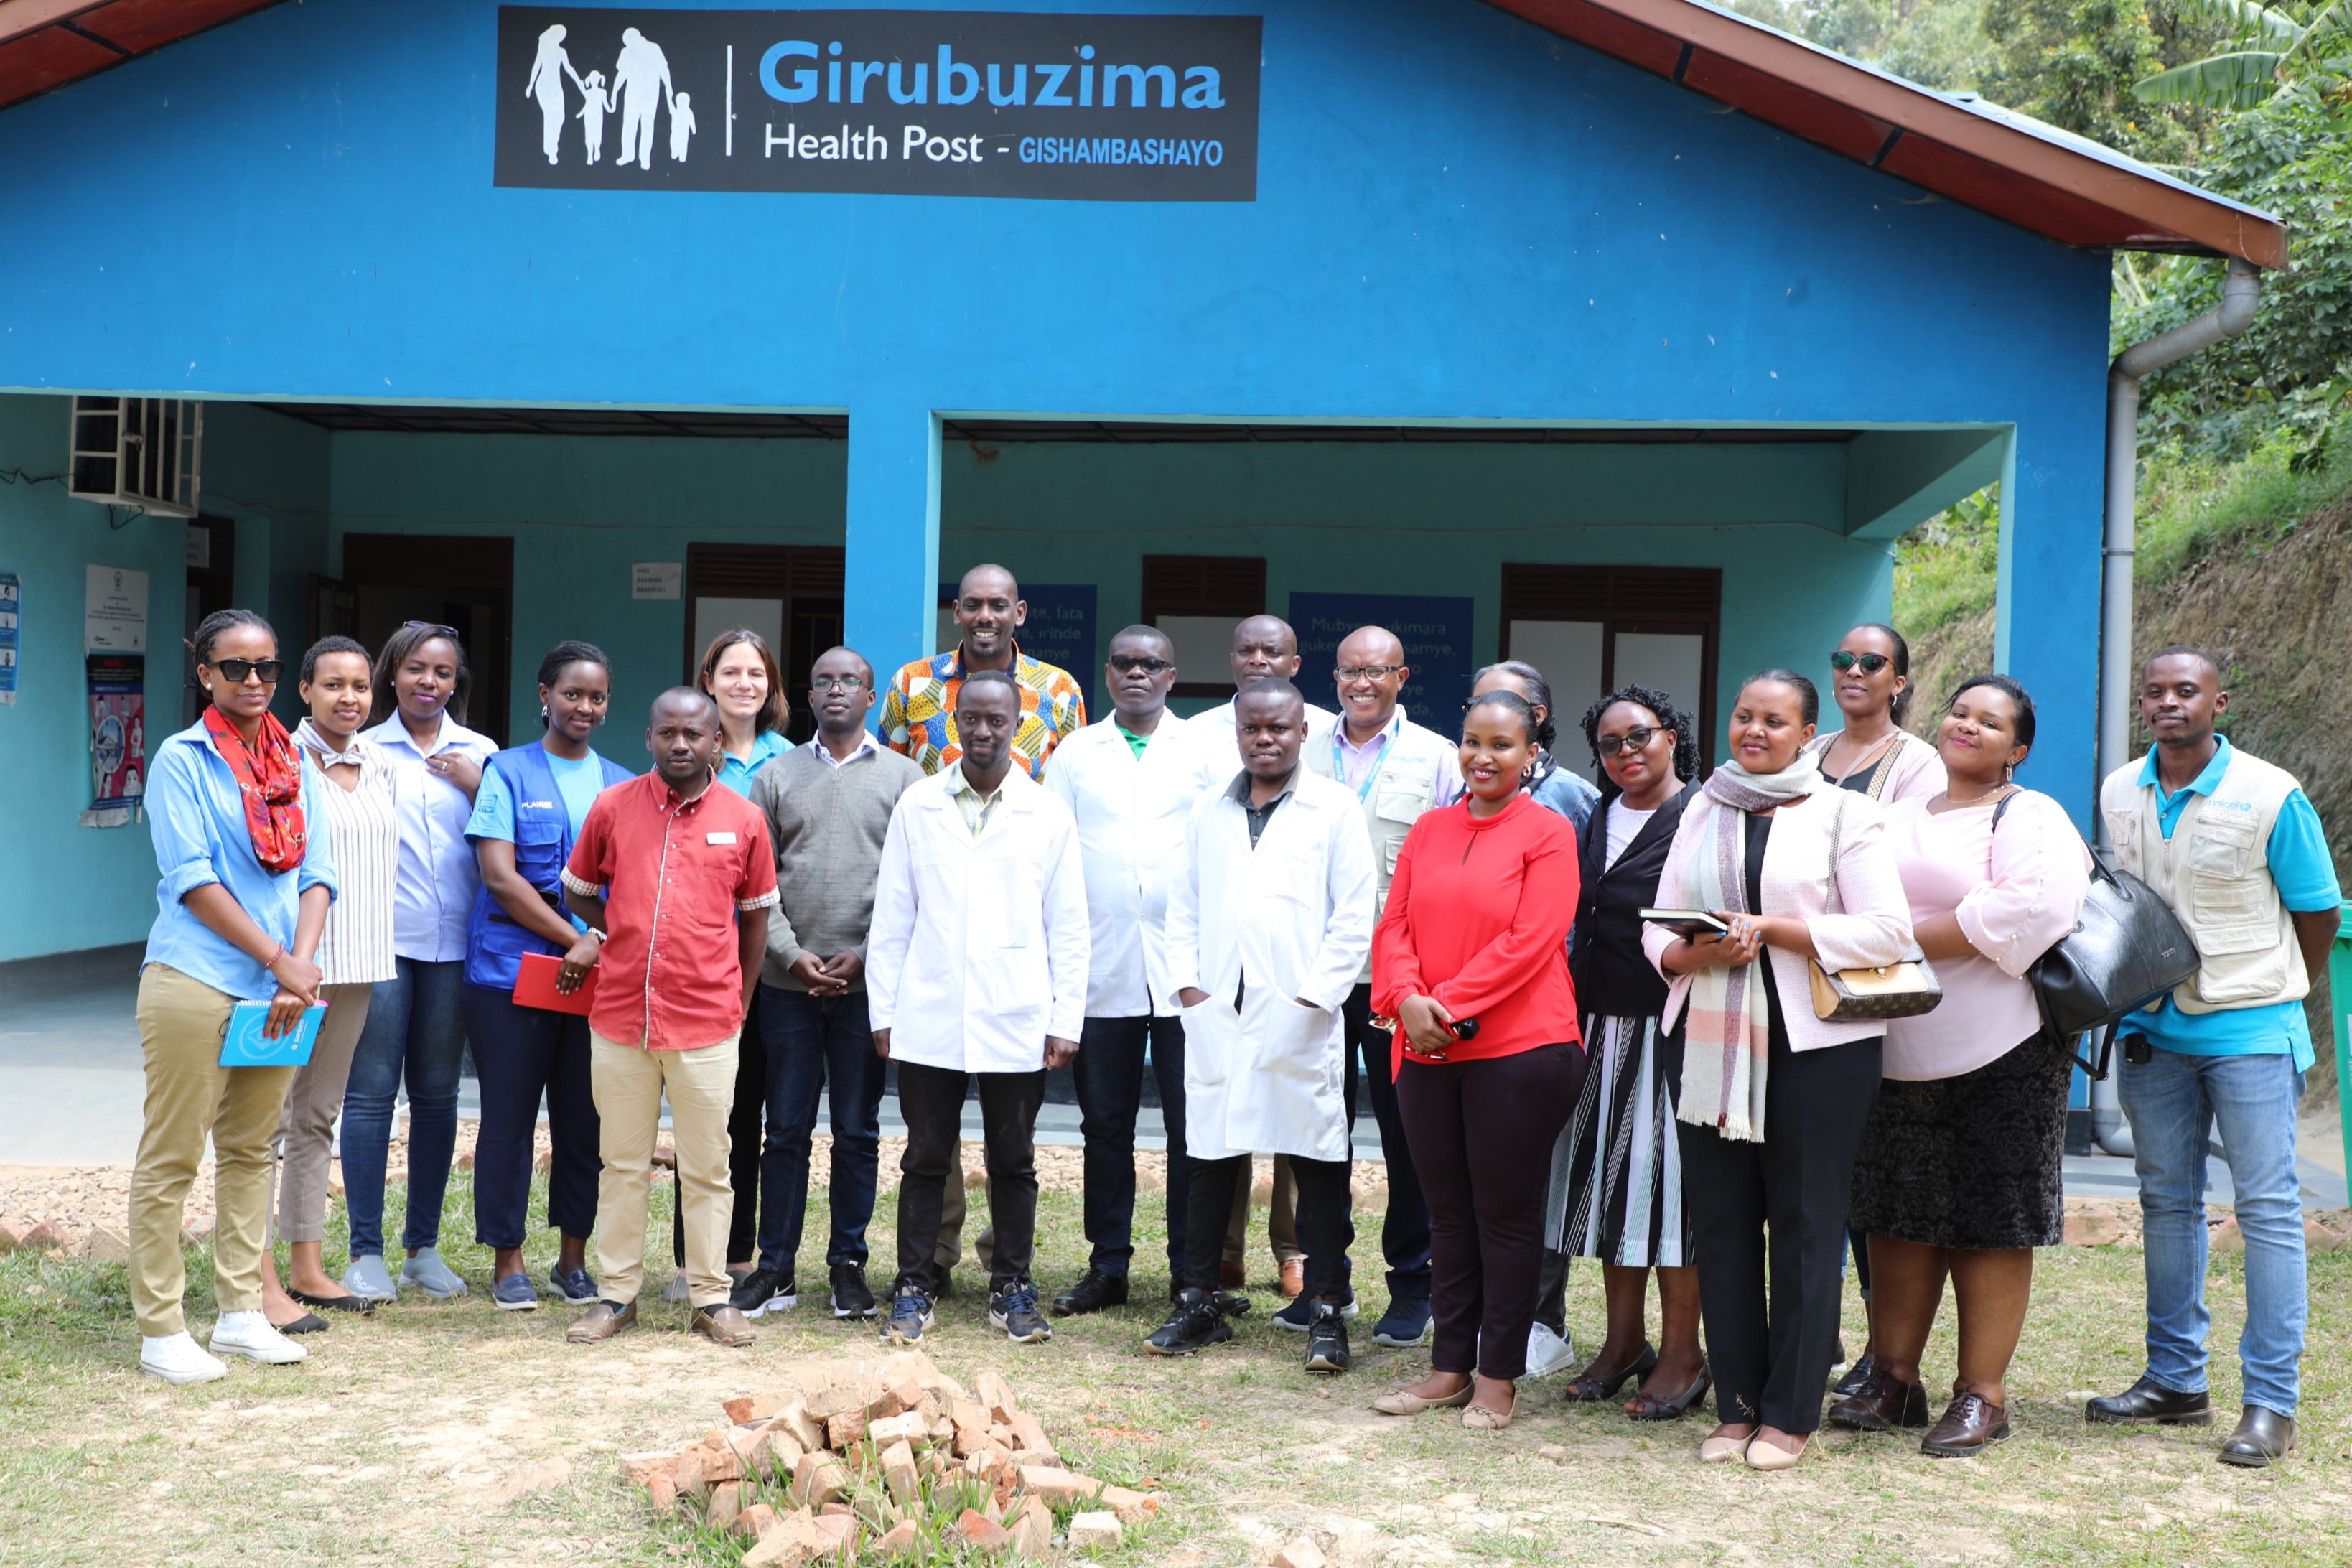 Officials and workers of the health post in a group photo . The health post was built through collaboration between UNICEF Rwanda, Society for Family Health (SFH), SC Johnson, and the Private Sector Federation.